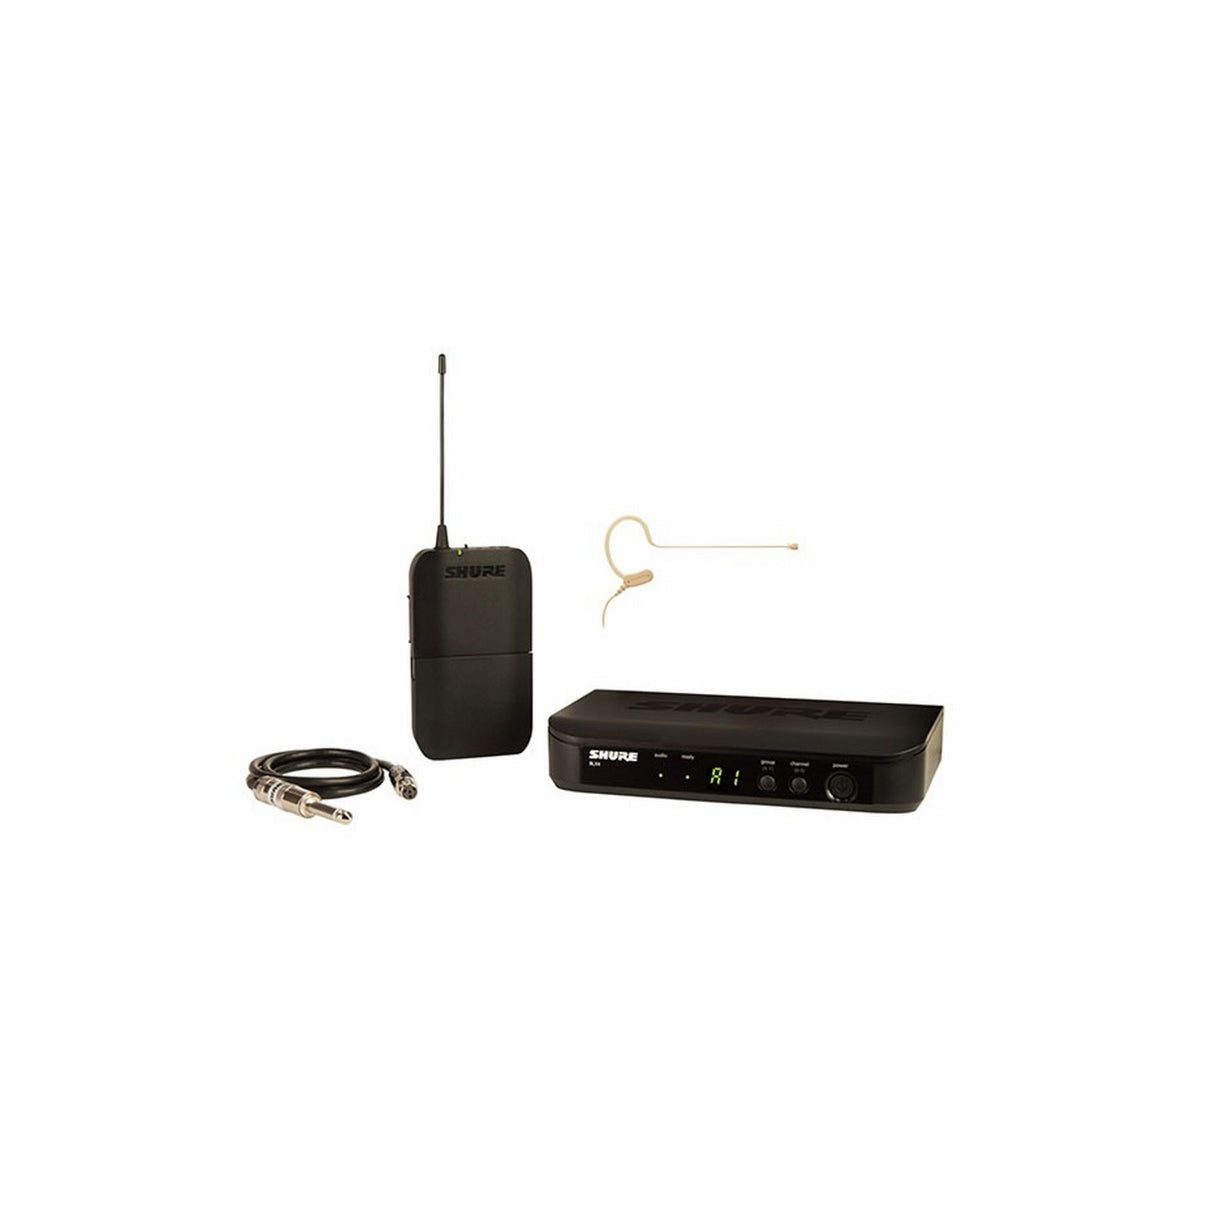 Shure BLX14-MX153T/O-TQG Omnidirectional Earset Wireless Guitar Microphone System, H10 542-572 MHz